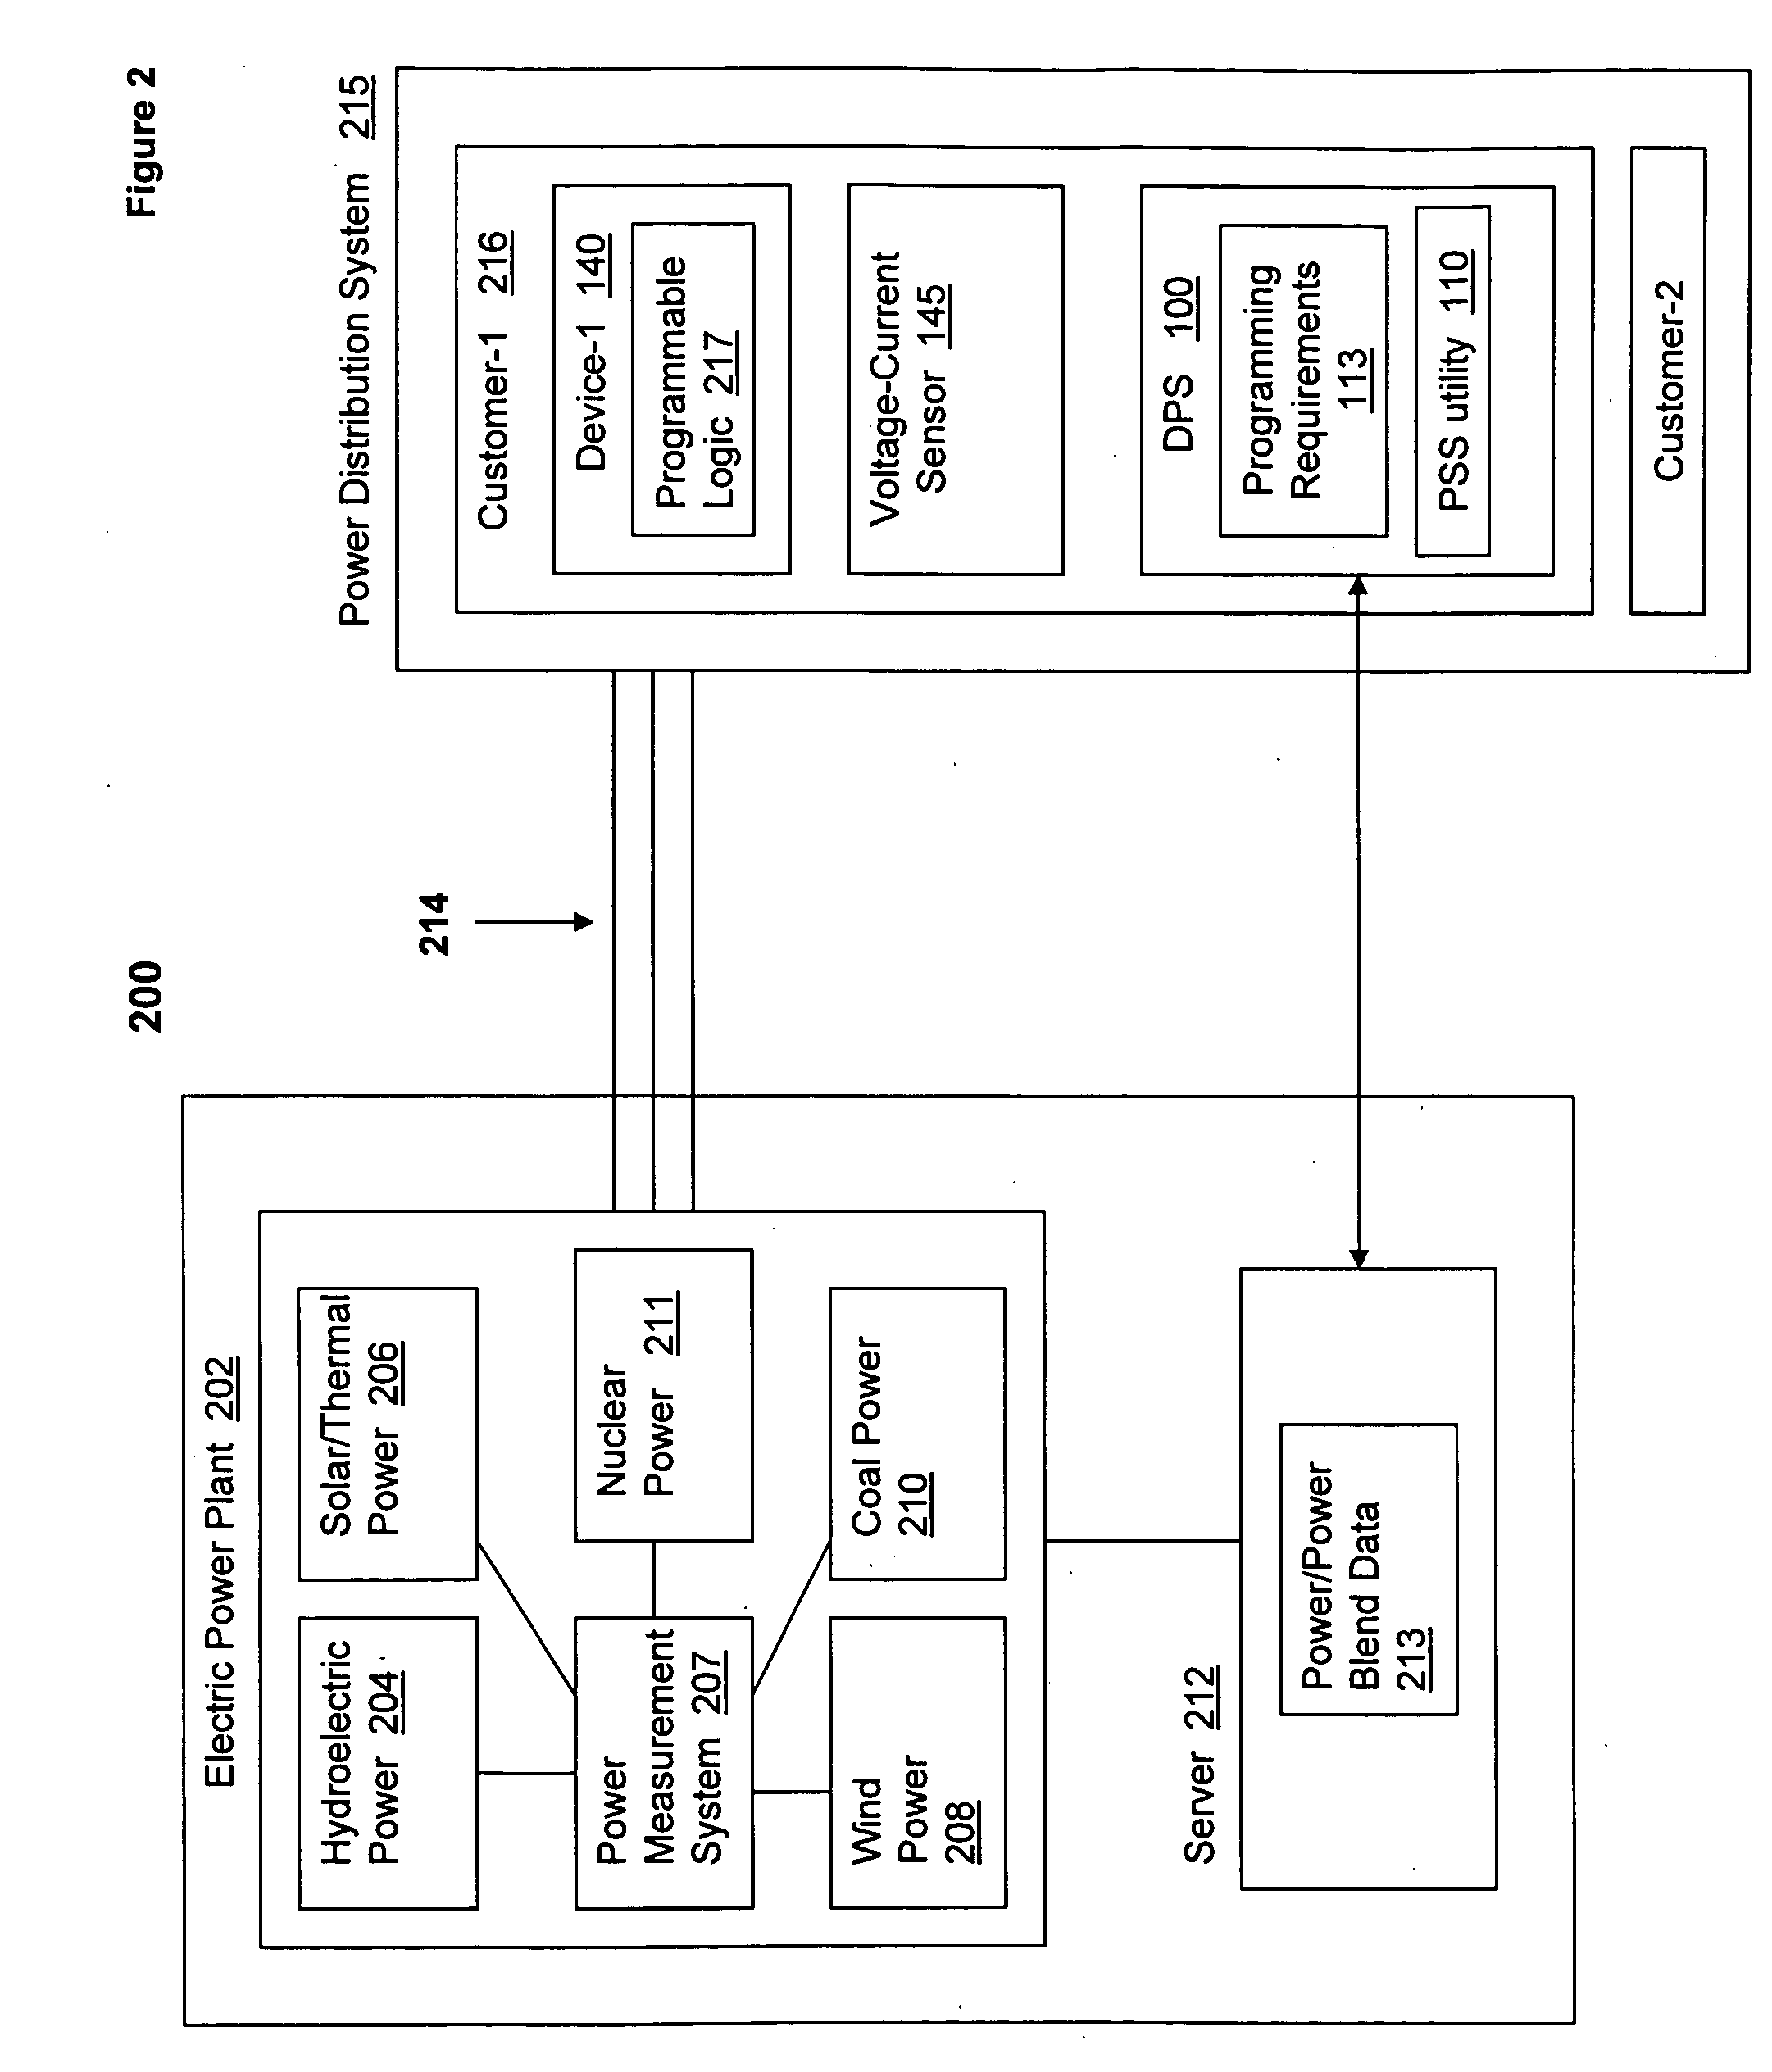 Dynamic Specification of Power Supply Sources